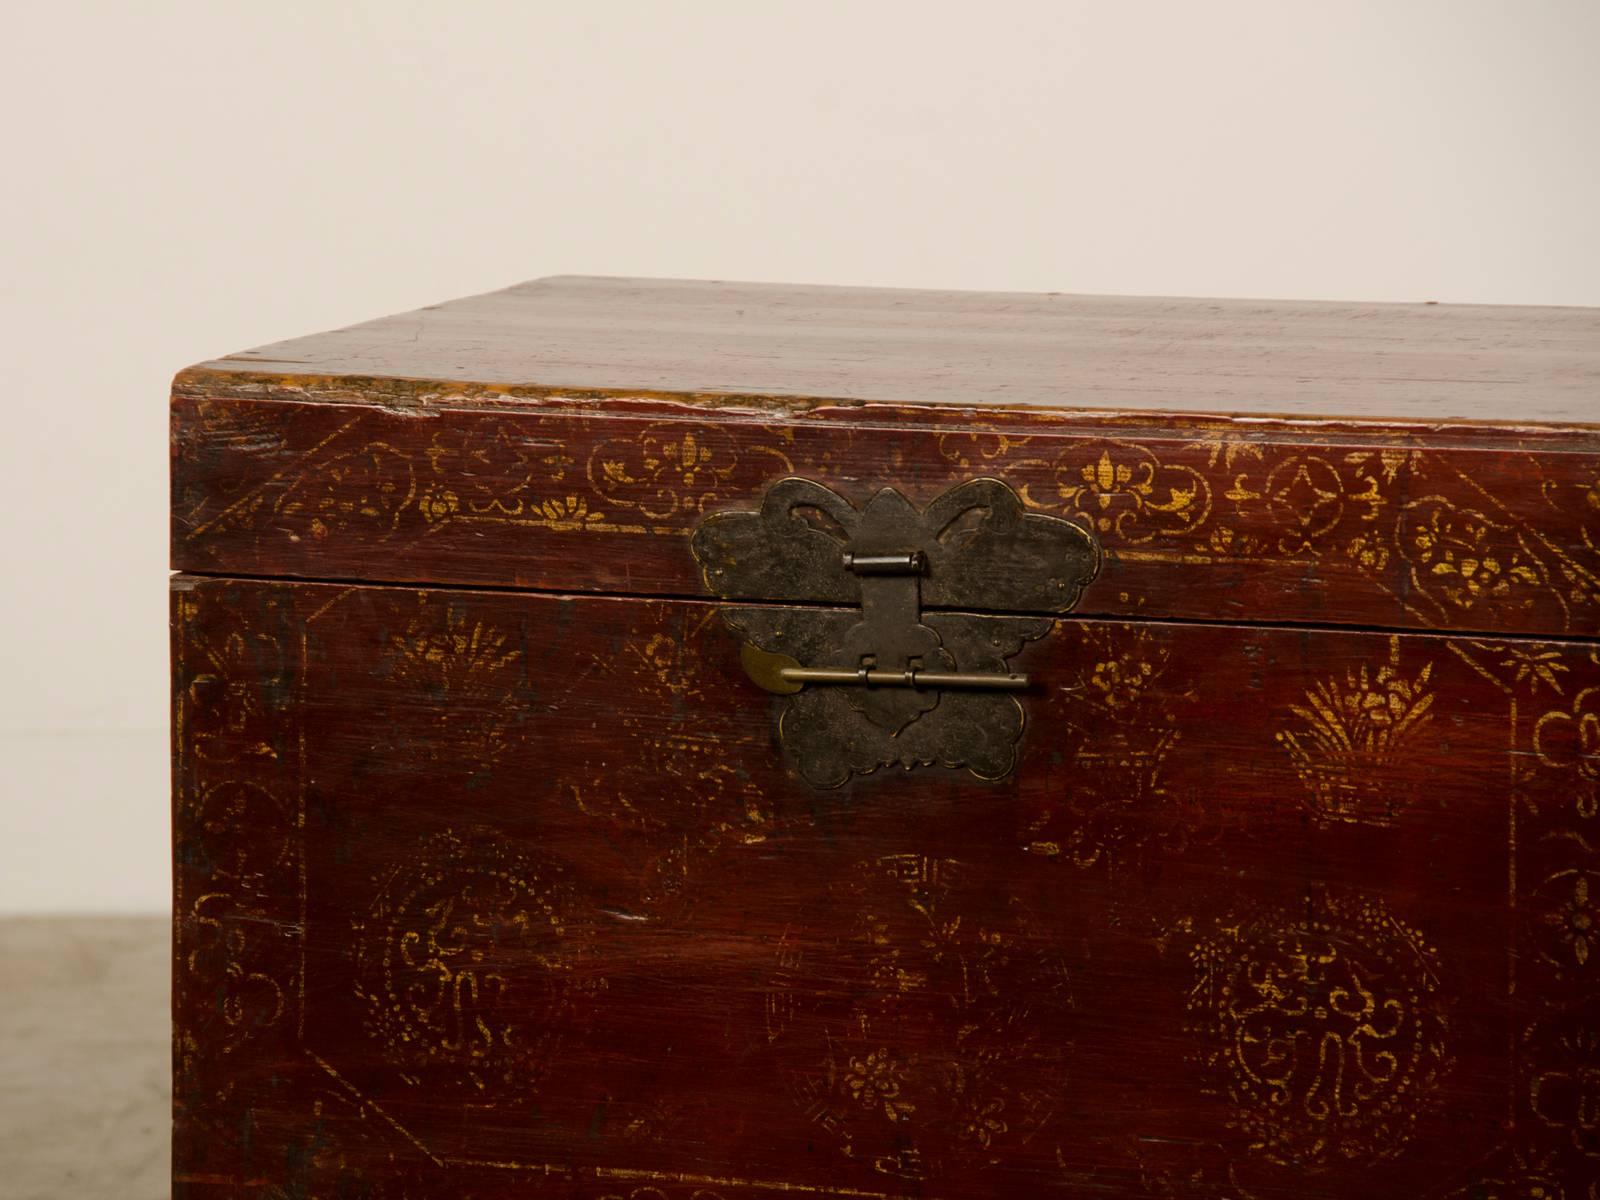 Be the first to see our new arrivals directly through 1stdibs! Please click Follow Dealer below. 

An antique Chinese red lacquer trunk with gilded detail from the Kuang Hsu period circa 1875. Please notice the beautiful gilded detail that moves